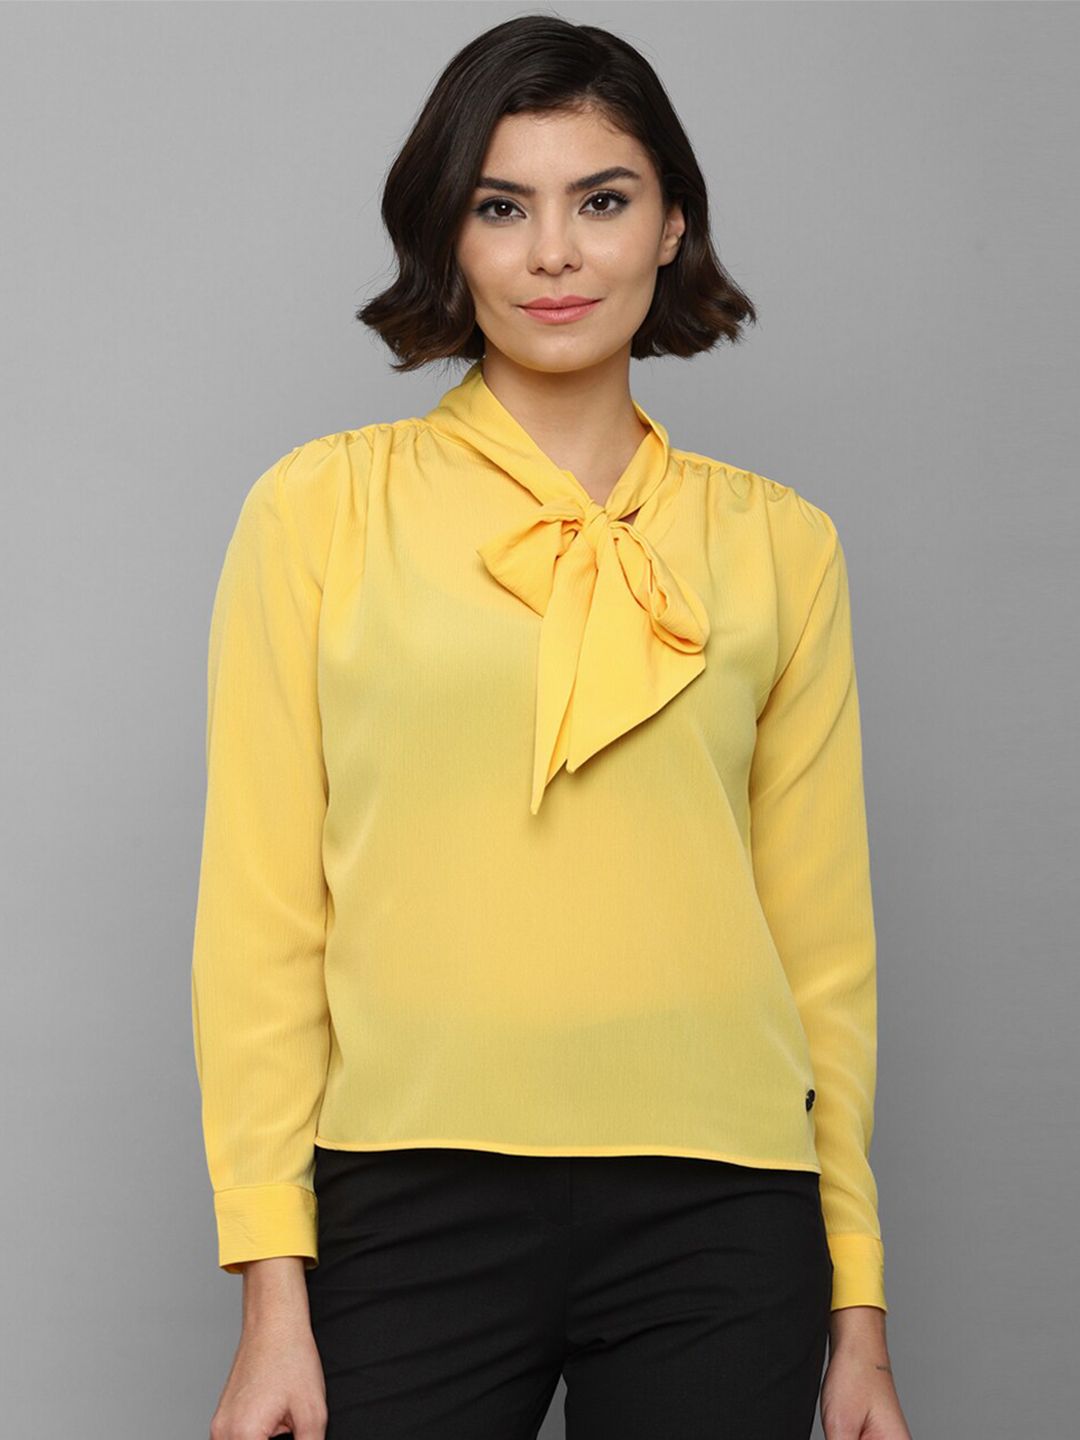 Allen Solly Woman Yellow Solid Tie-Up Neck Long Cuffed Sleeves Top Price in India